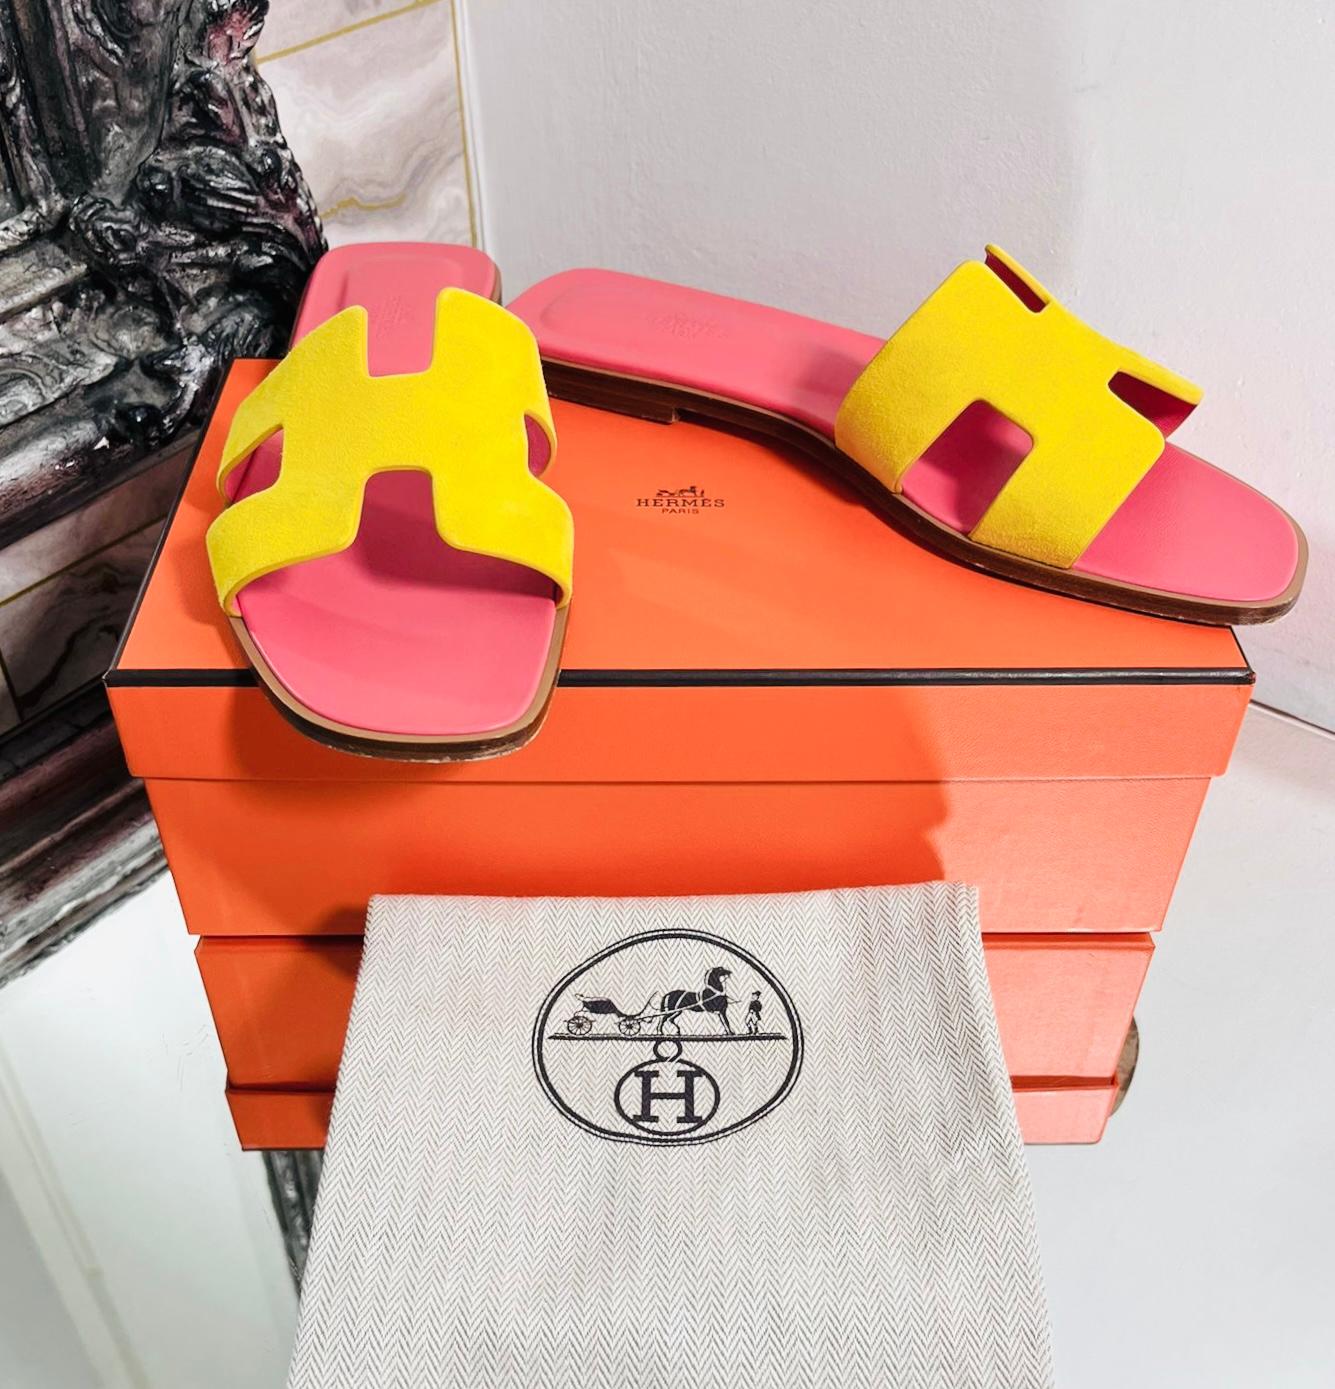 Hermes Suede Oran Sandals

Iconic sandals with 'H' cut-out silhouette in Jaune Sable.

Featuring leather insoles. Rrp £570

Size – 40

Condition – Very Good/Excellent

Composition – Suede

Comes with – Box, Dust Bag